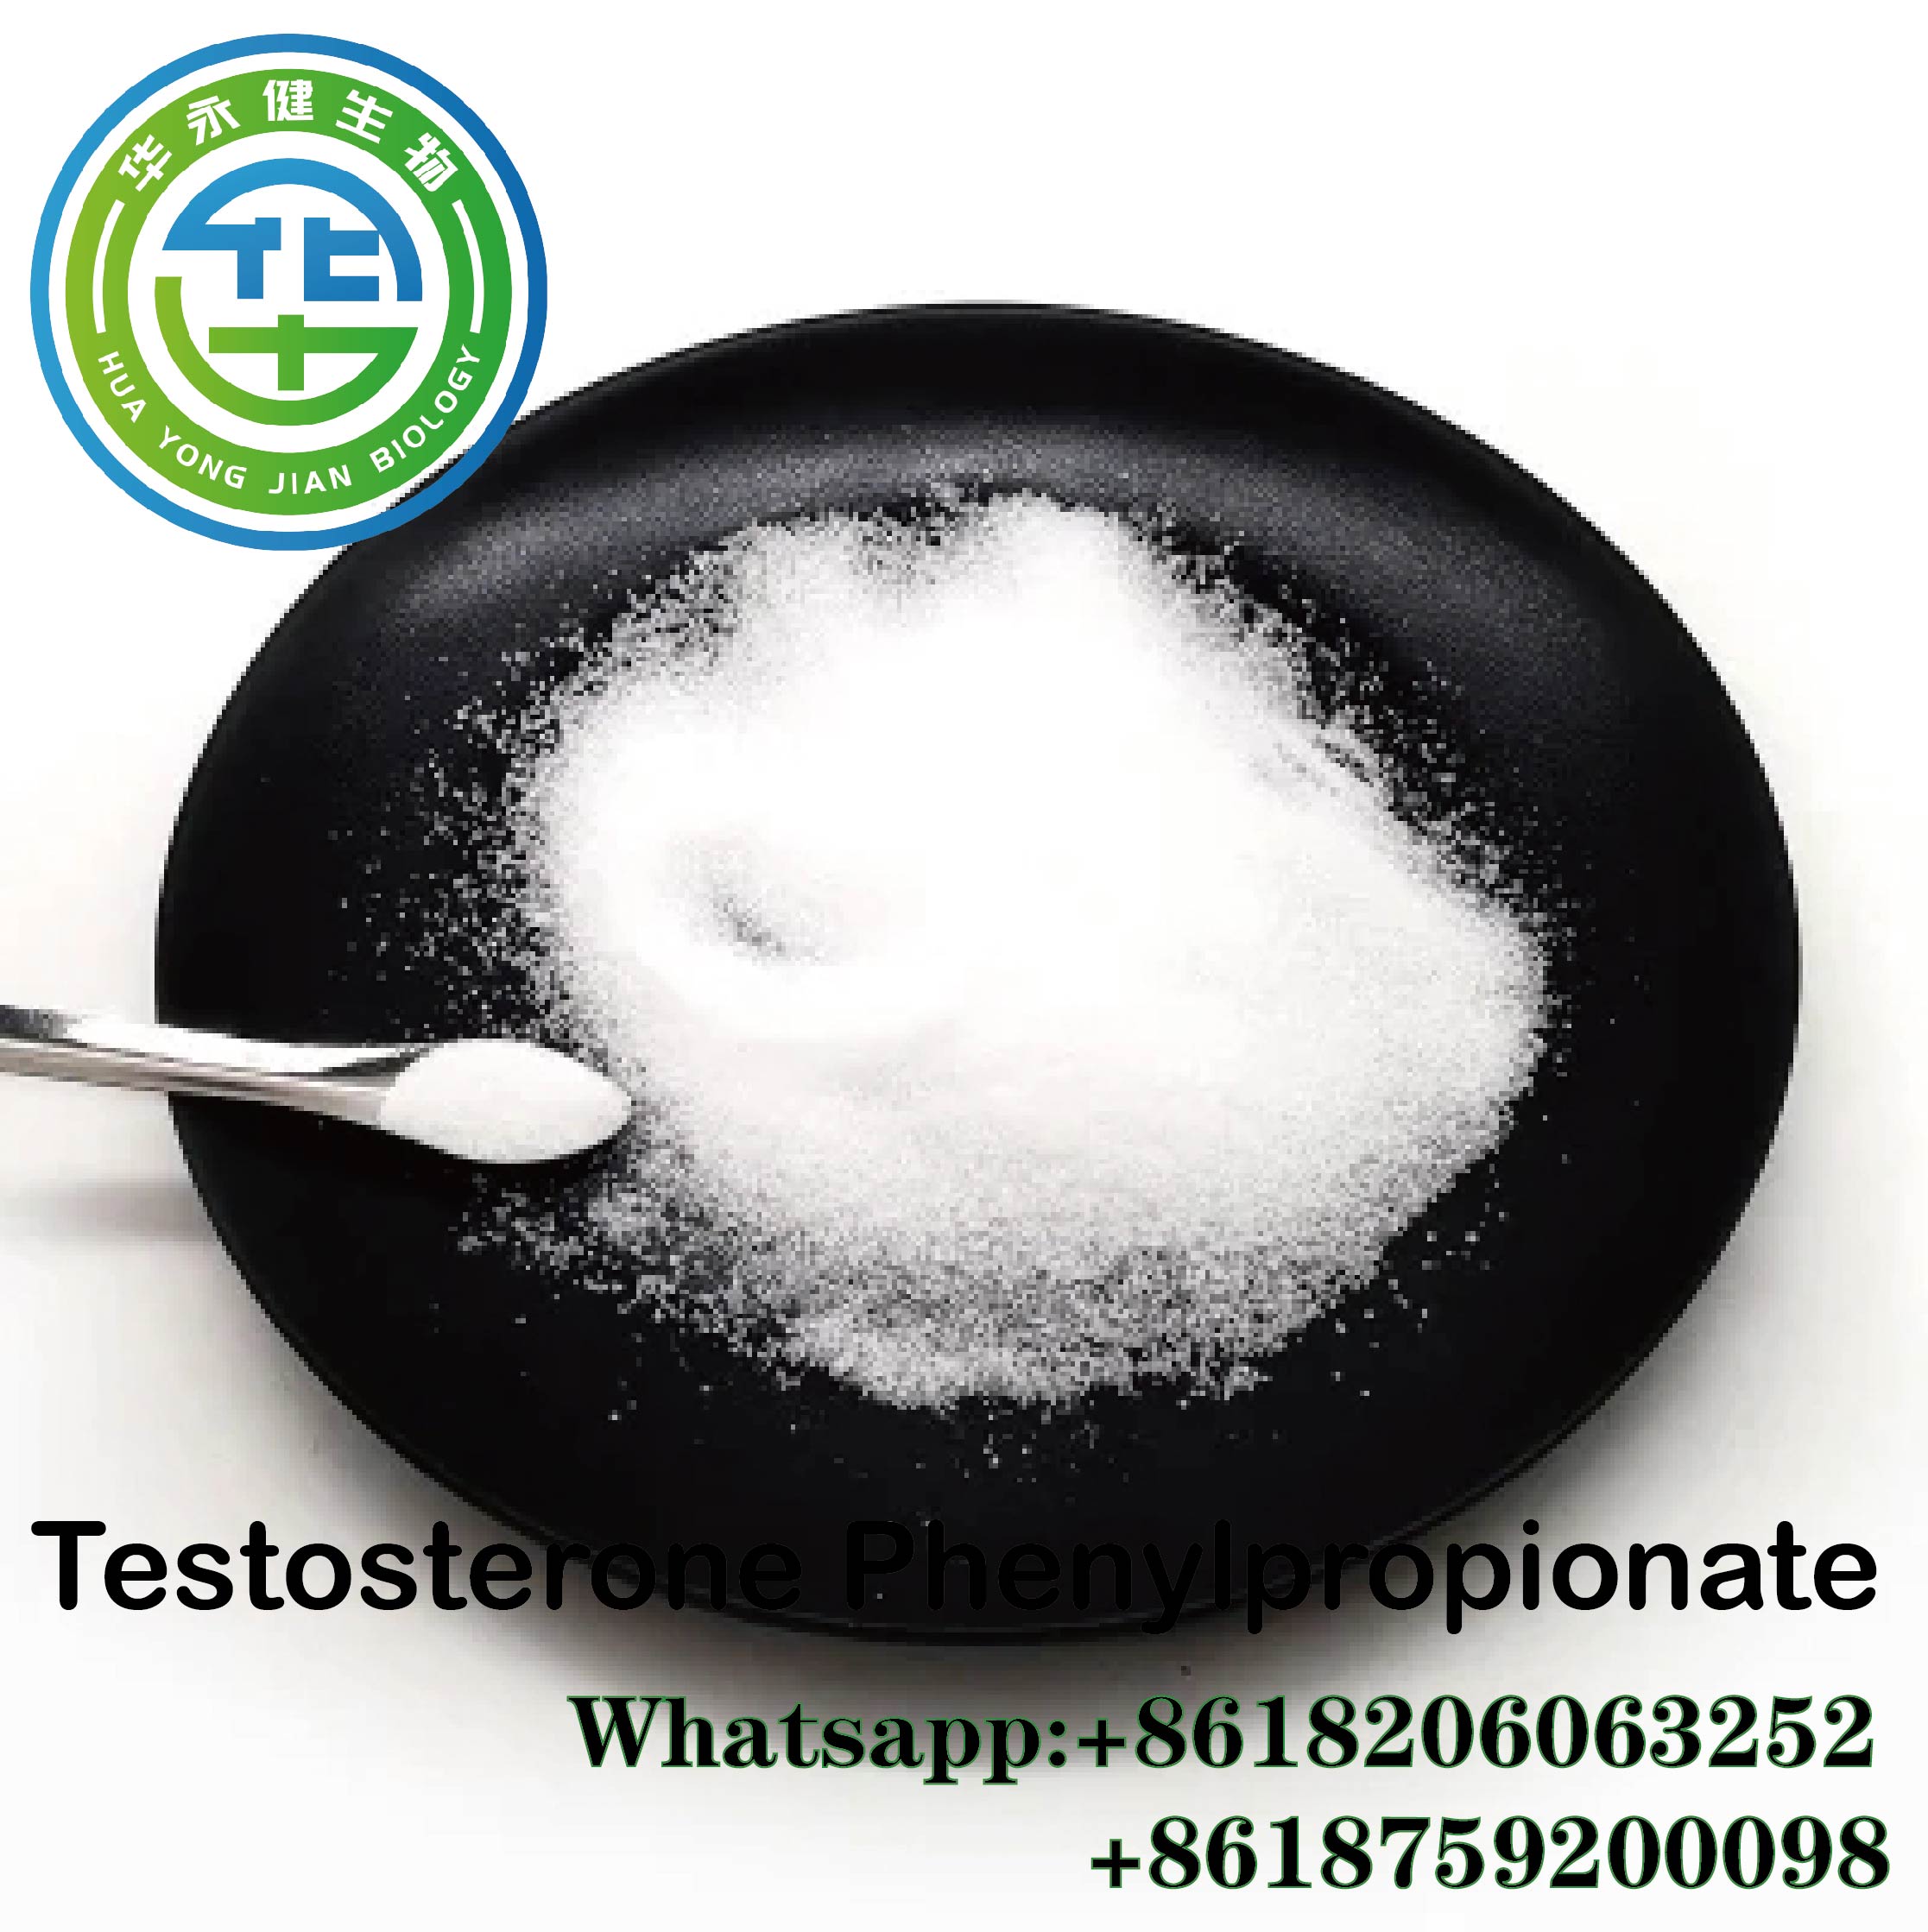 Bodybuilding with Testosterone Phenylpropionate  CAS 1255-49-8 for Muscle Growth Steroids Raw Powder